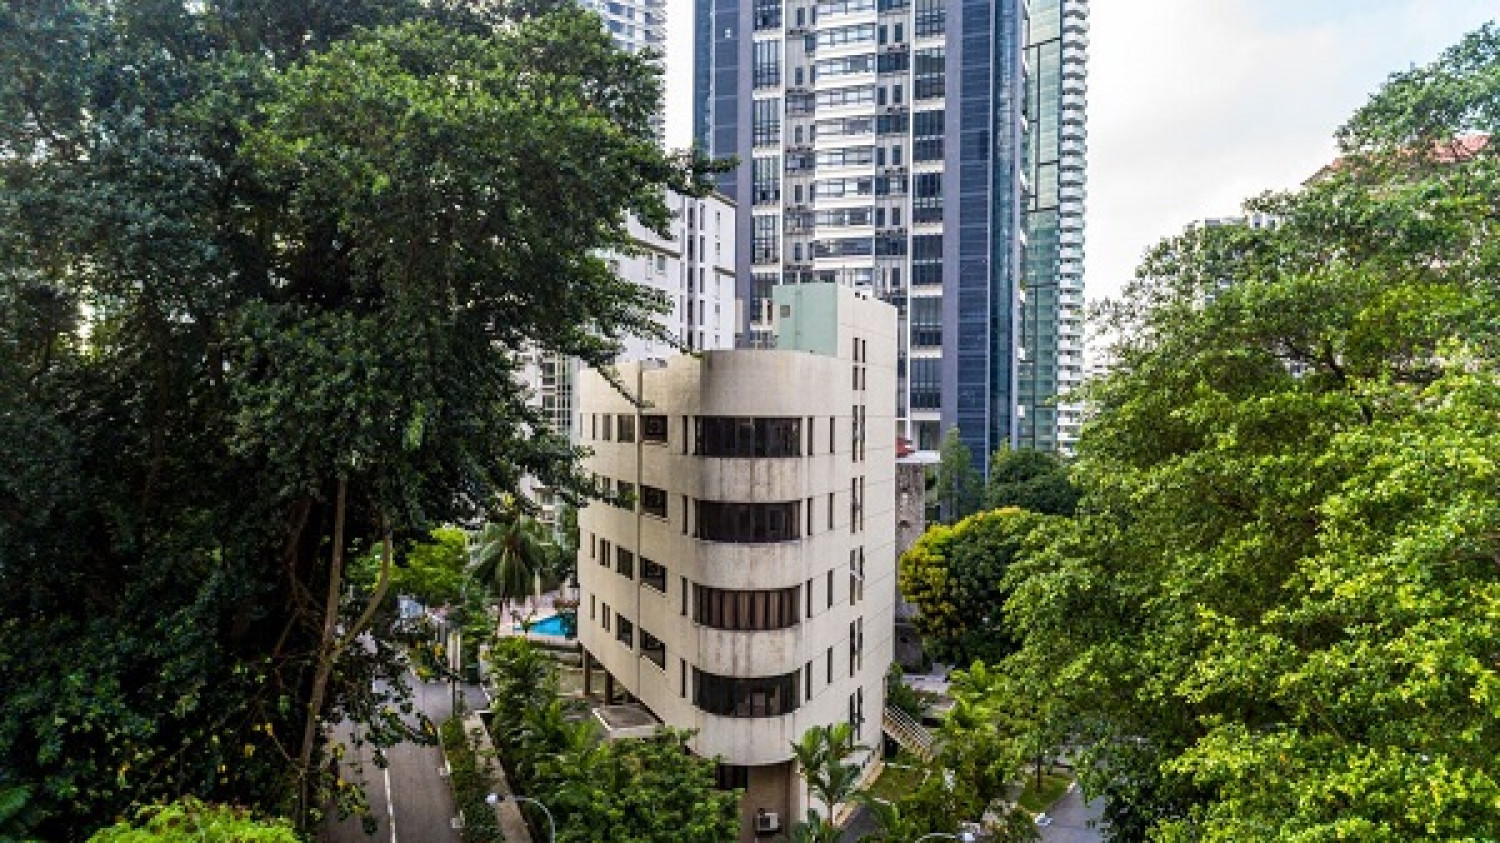 St Thomas Lodge up for sale with $40 mil guide price - Property News